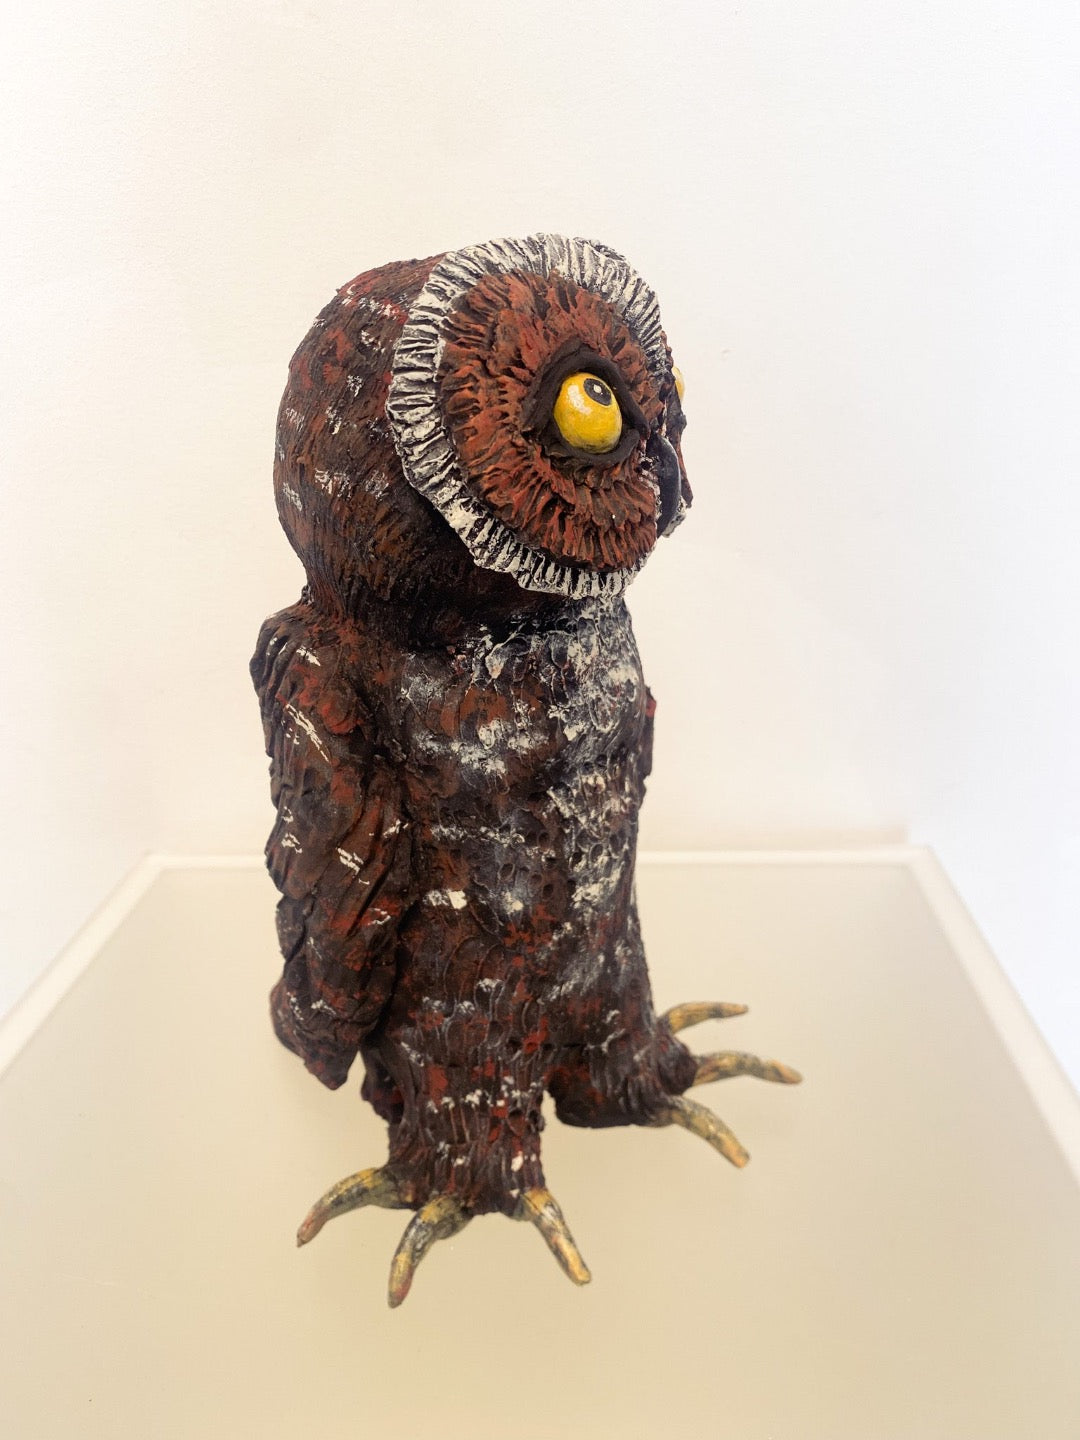 Alfred (Owl)